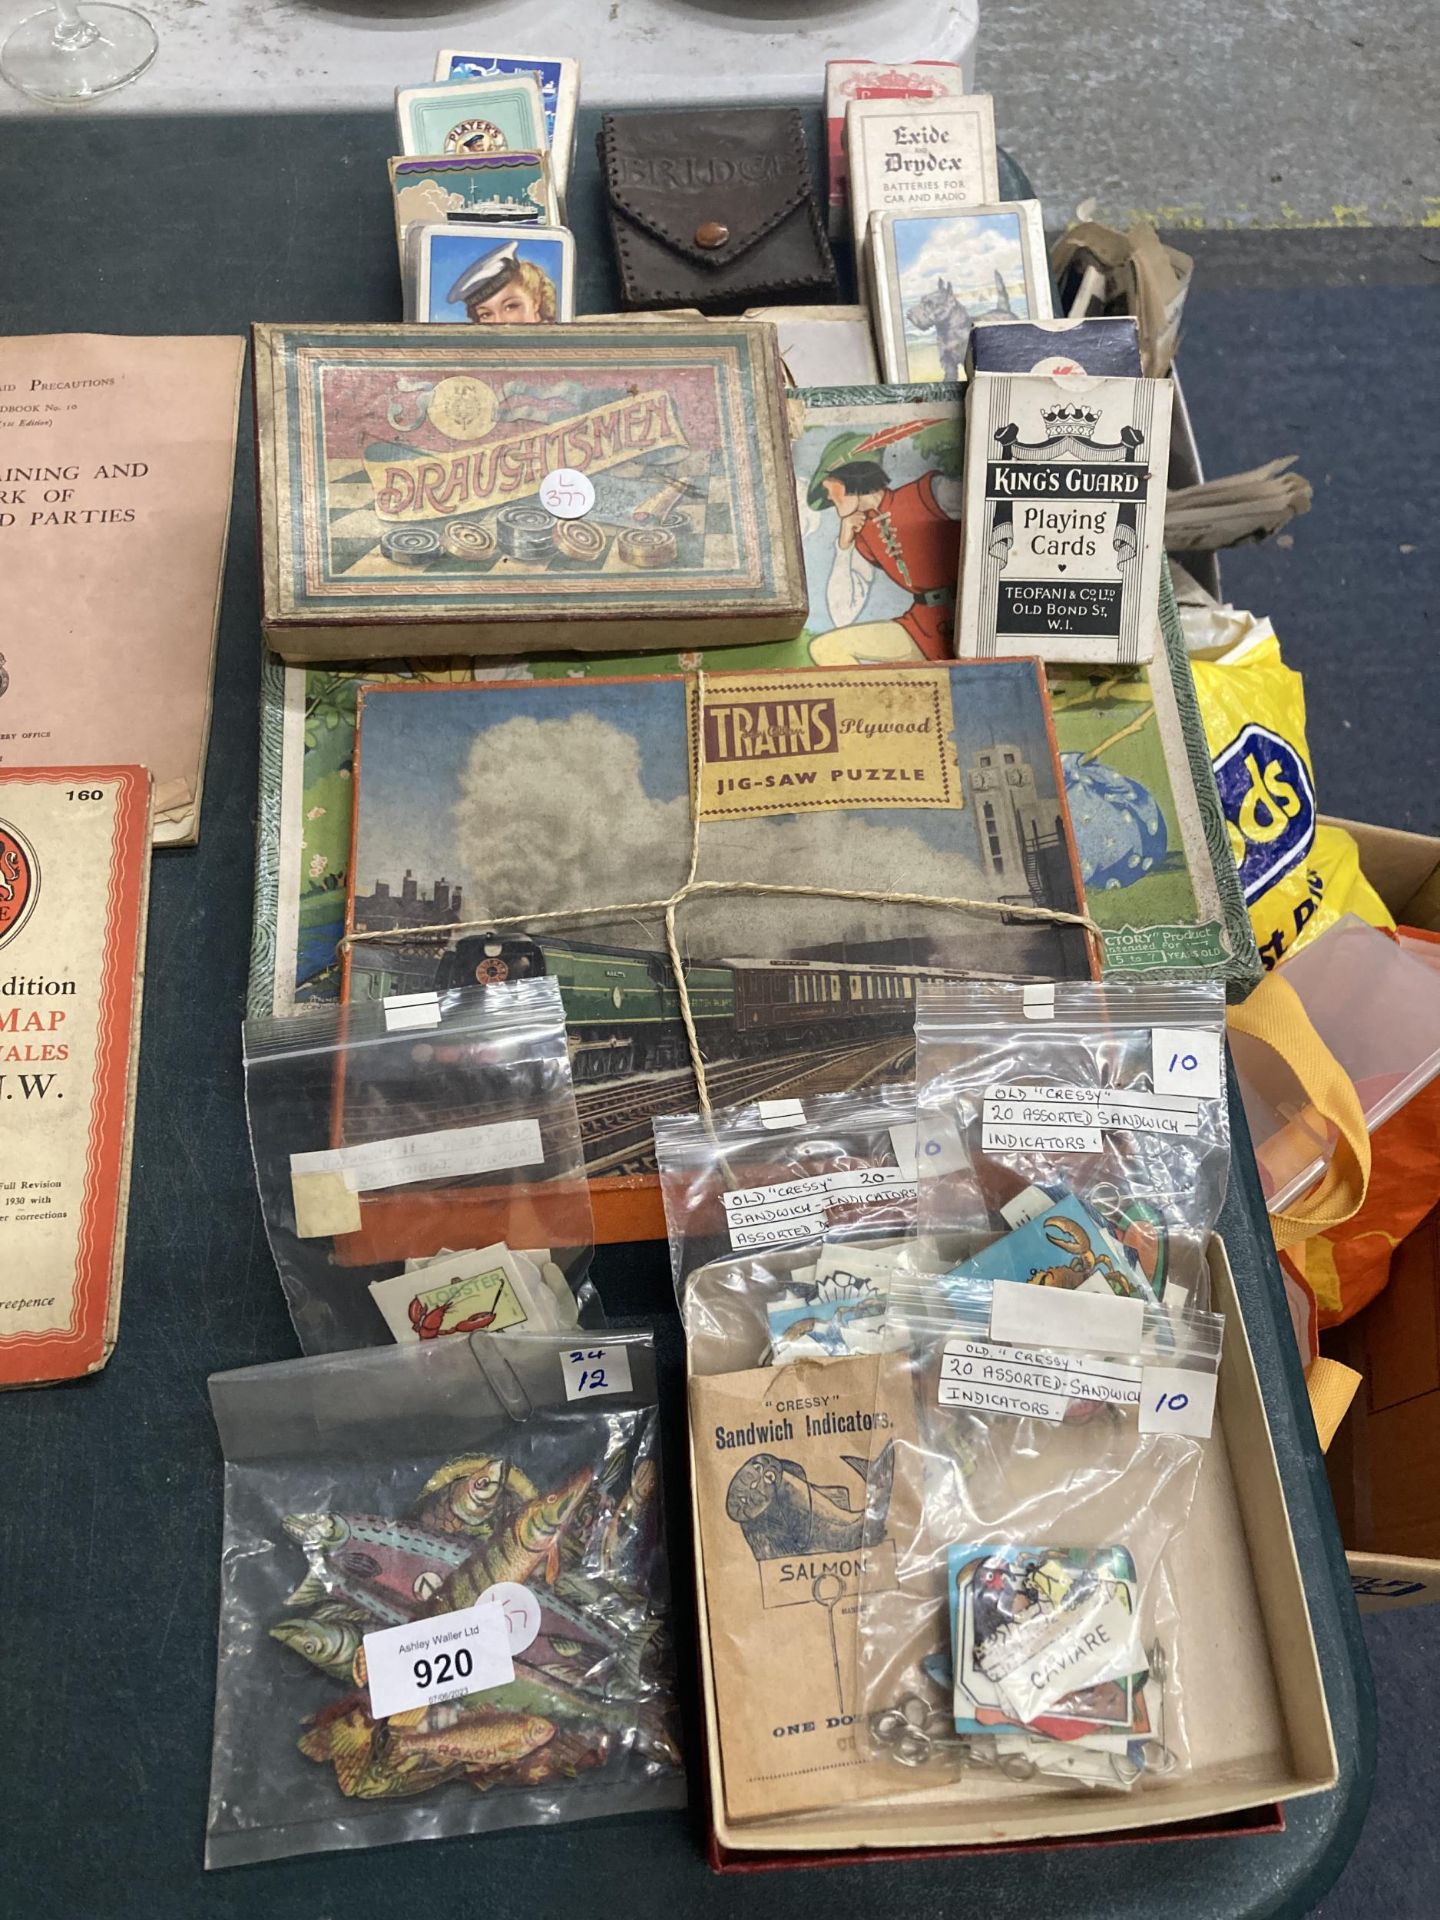 A QUANTITY OF VINTAGE PLAYING CARDS, JIGSAWS, BOXED DRAUGHTSMEN, SANDWICH INDICATORS, ETC